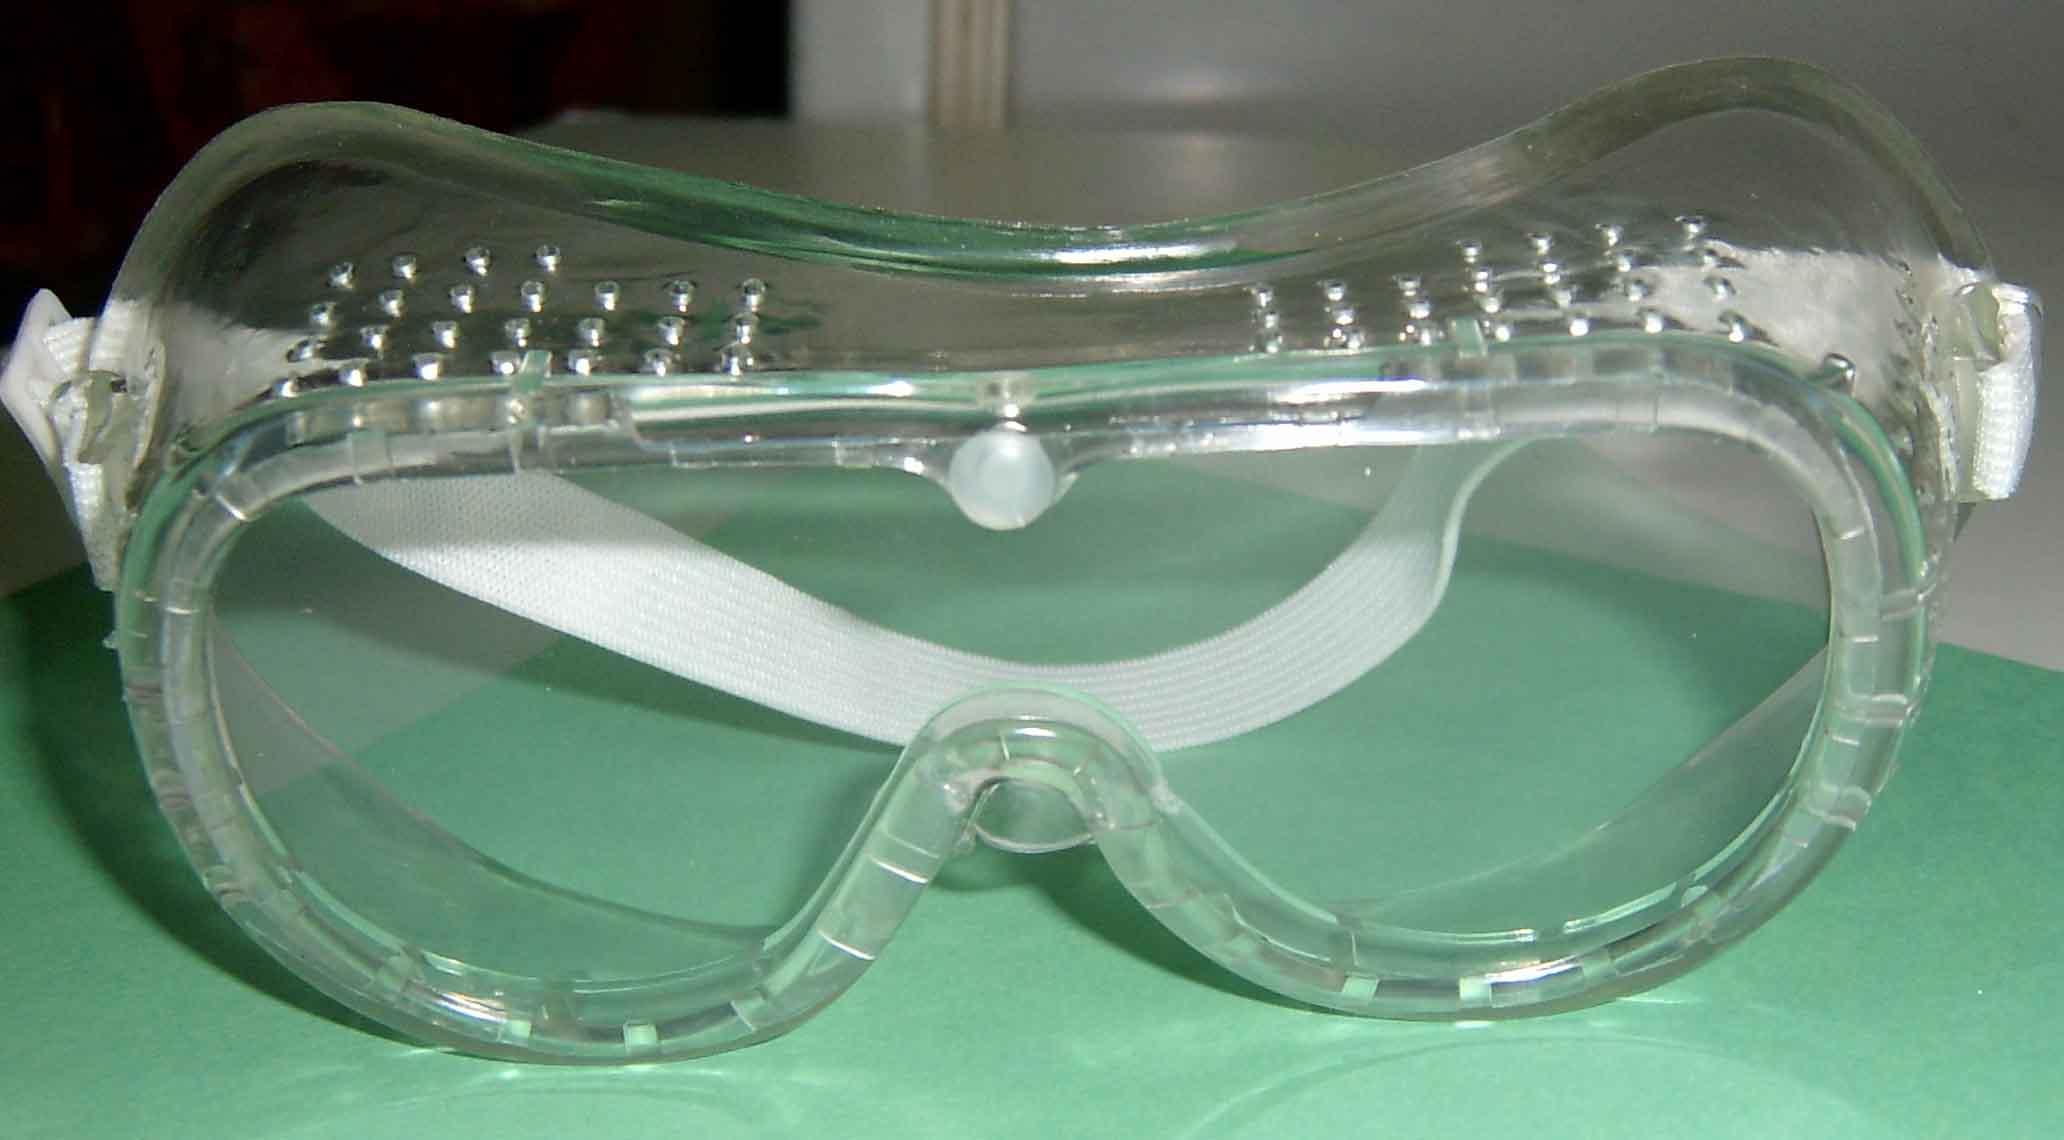  Protective Goggles ( Protective Goggles)